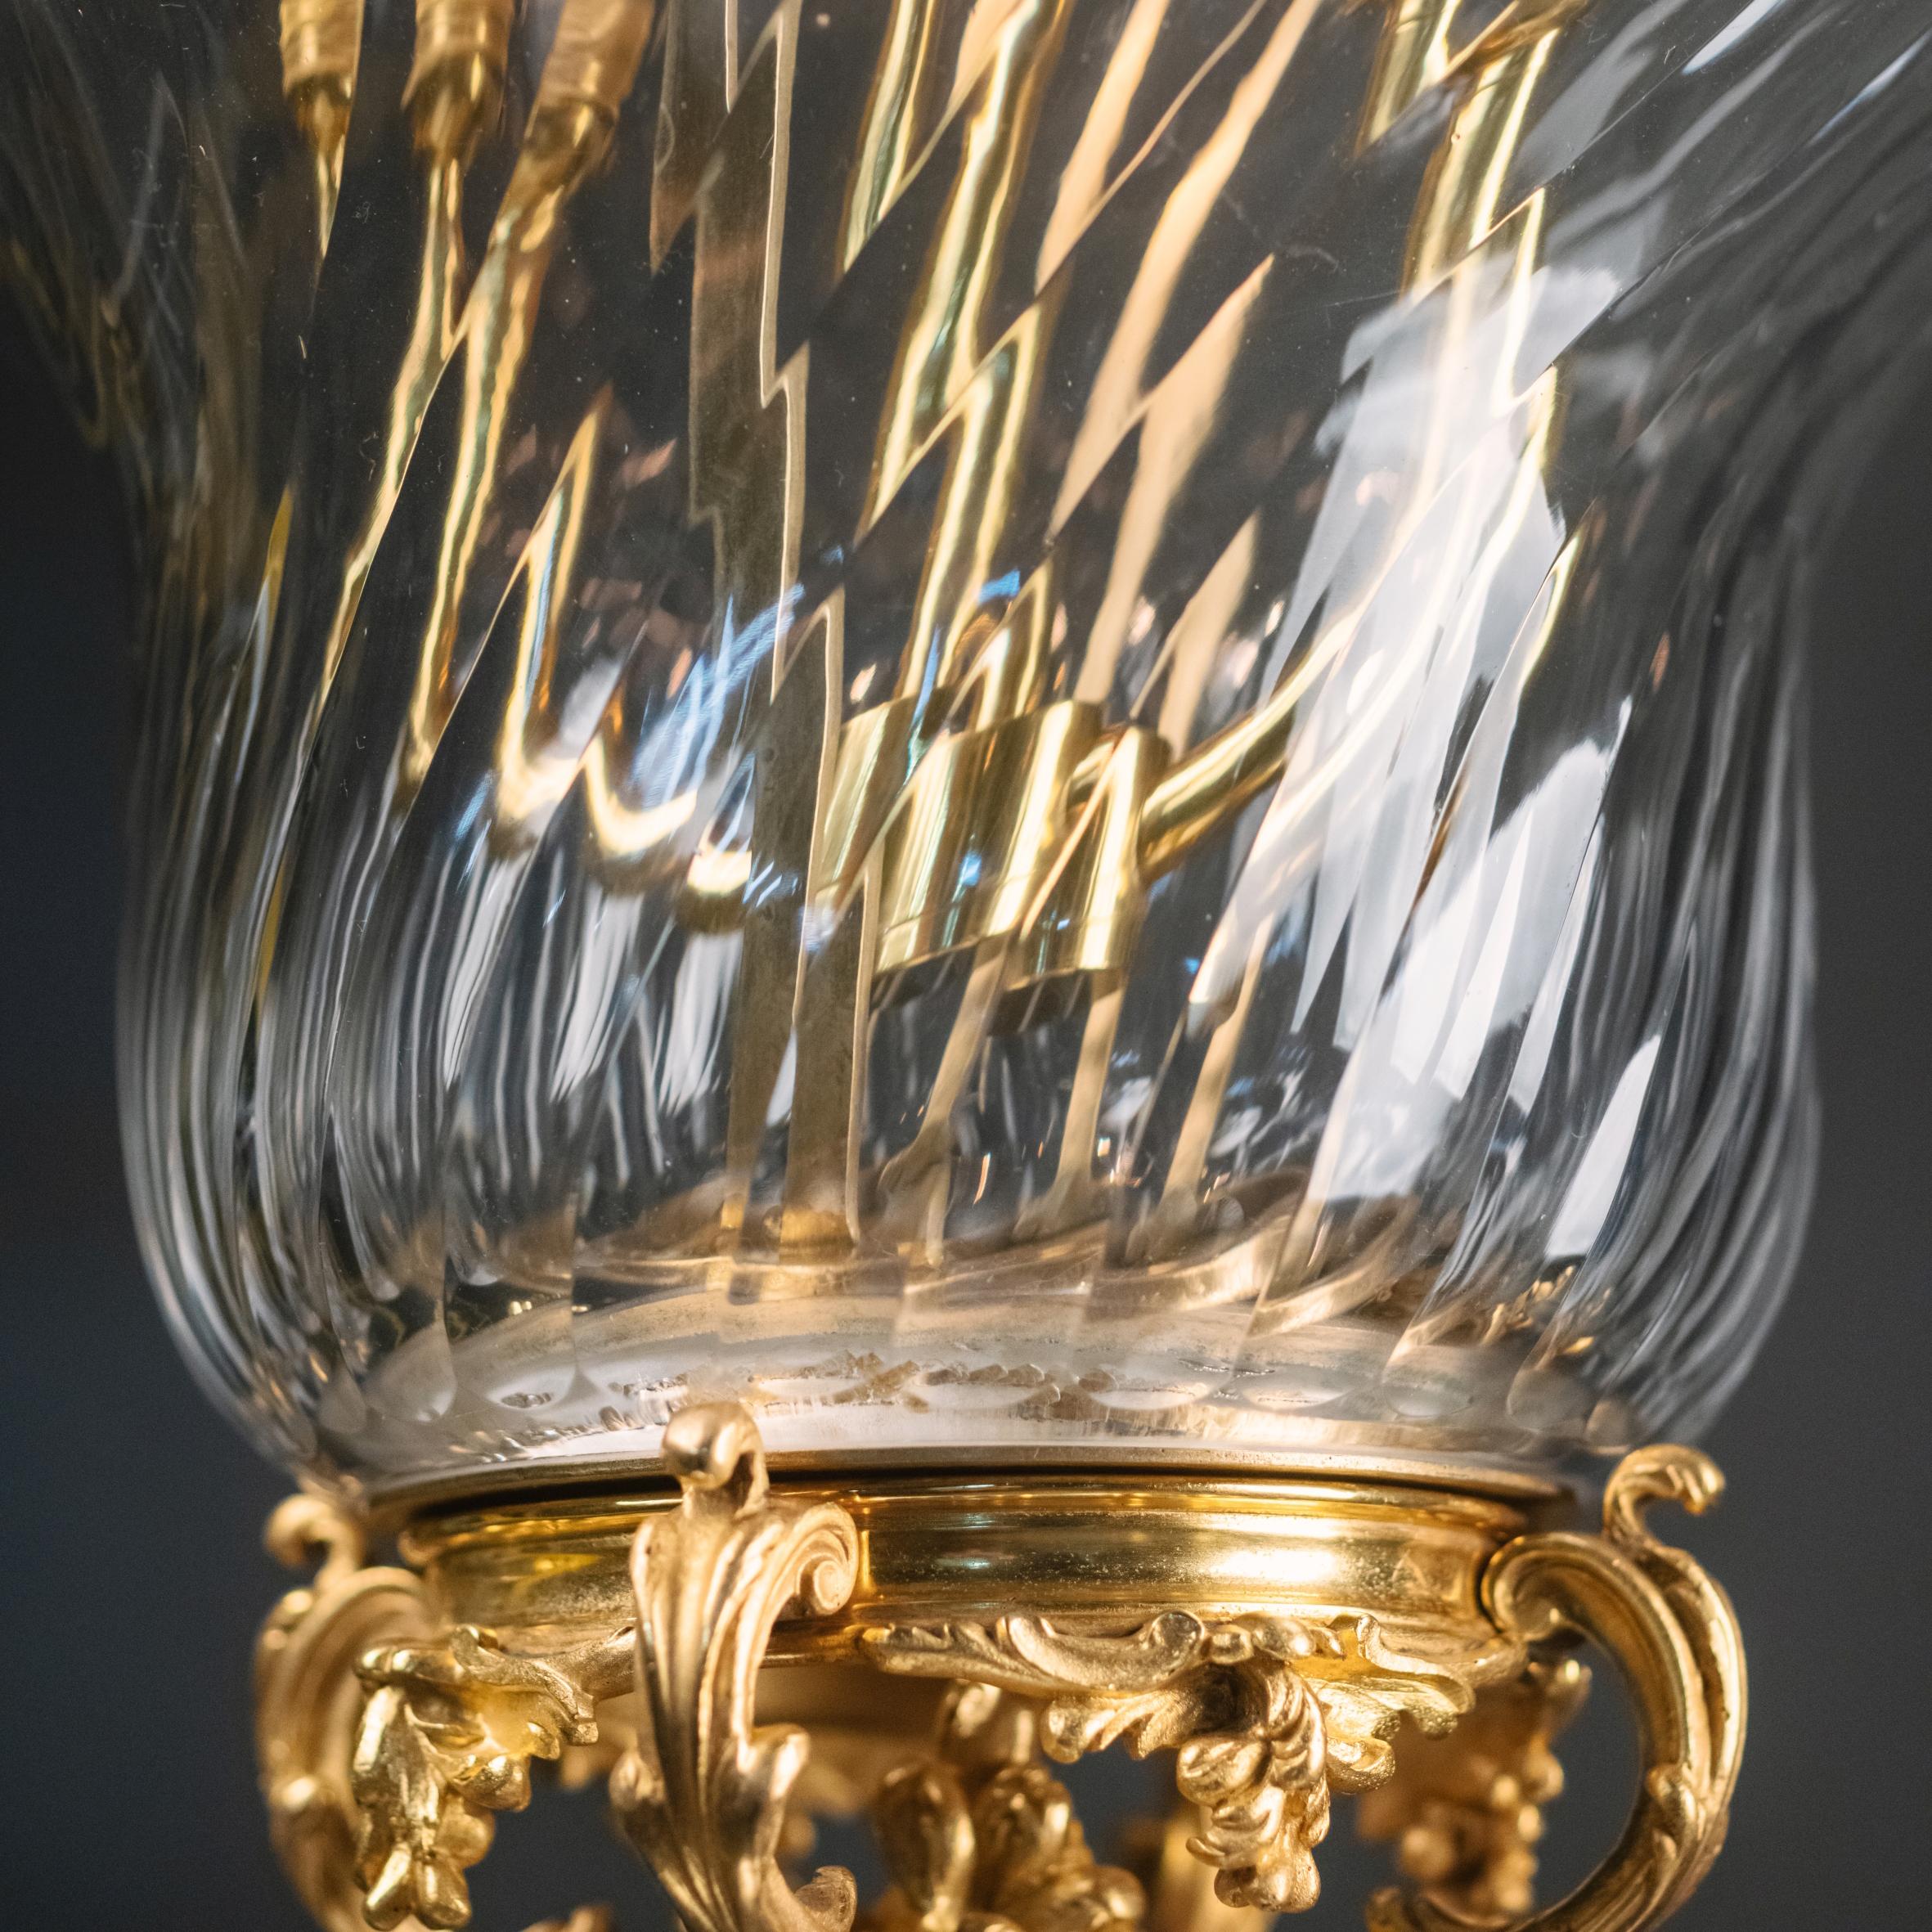 An unusual gilt-bronze and spiral moulded glass lantern, attributed to François Linke.

This striking lantern has a scrolling acanthus cast crown above a central stem and a pierced frame and collar supporting a spirally fluted moulded glass